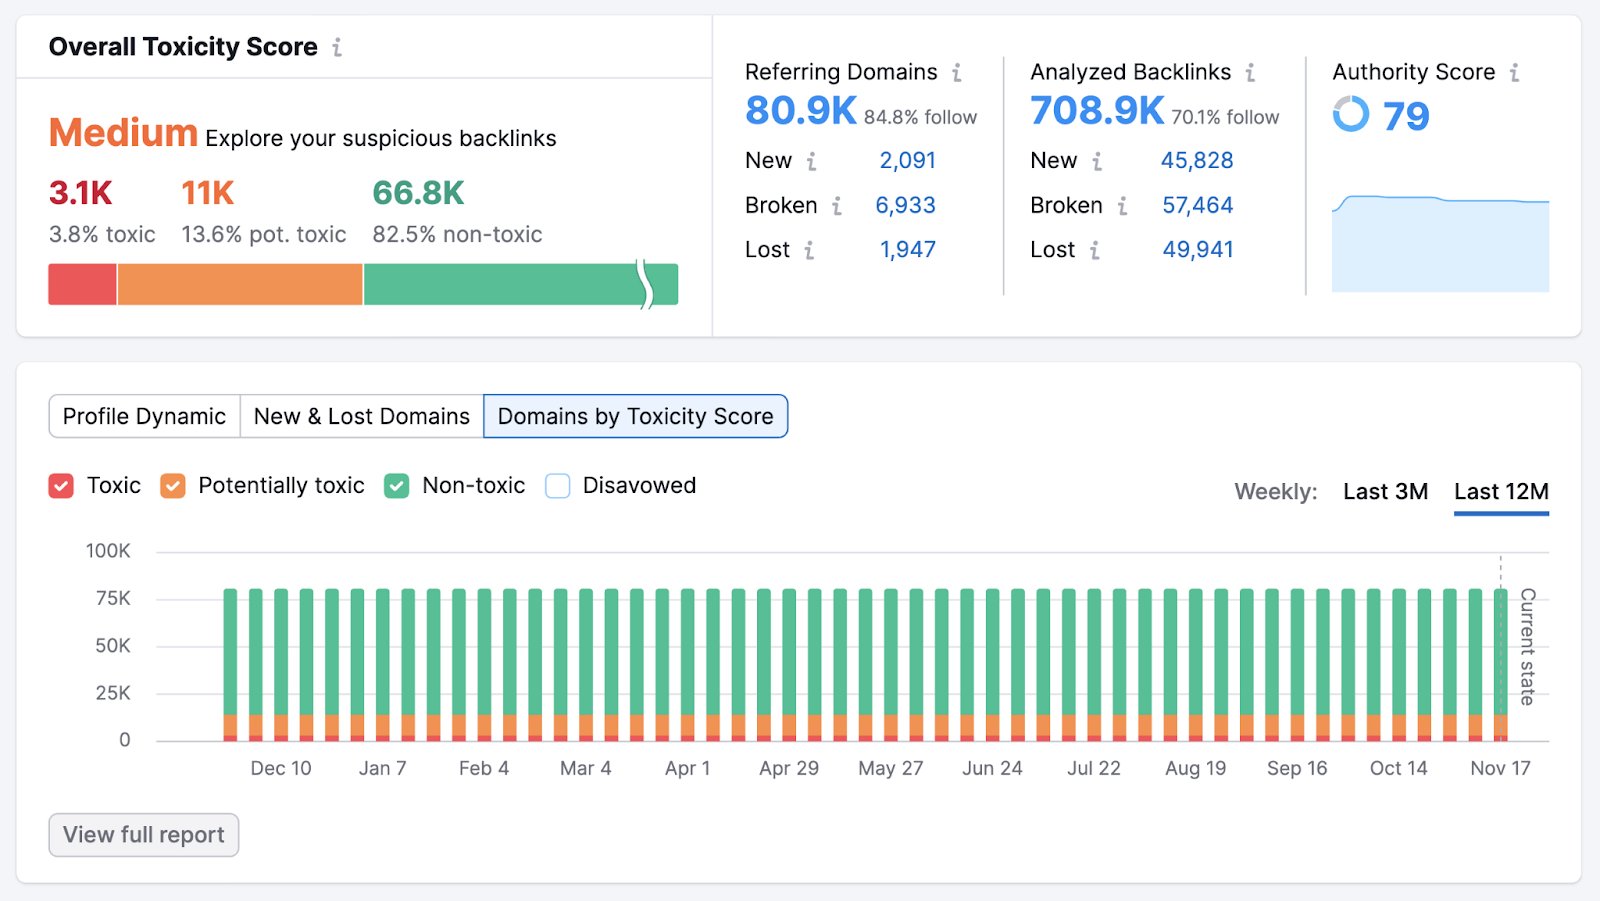 "Overall Toxicity Score" section of Backlink Audit overview report